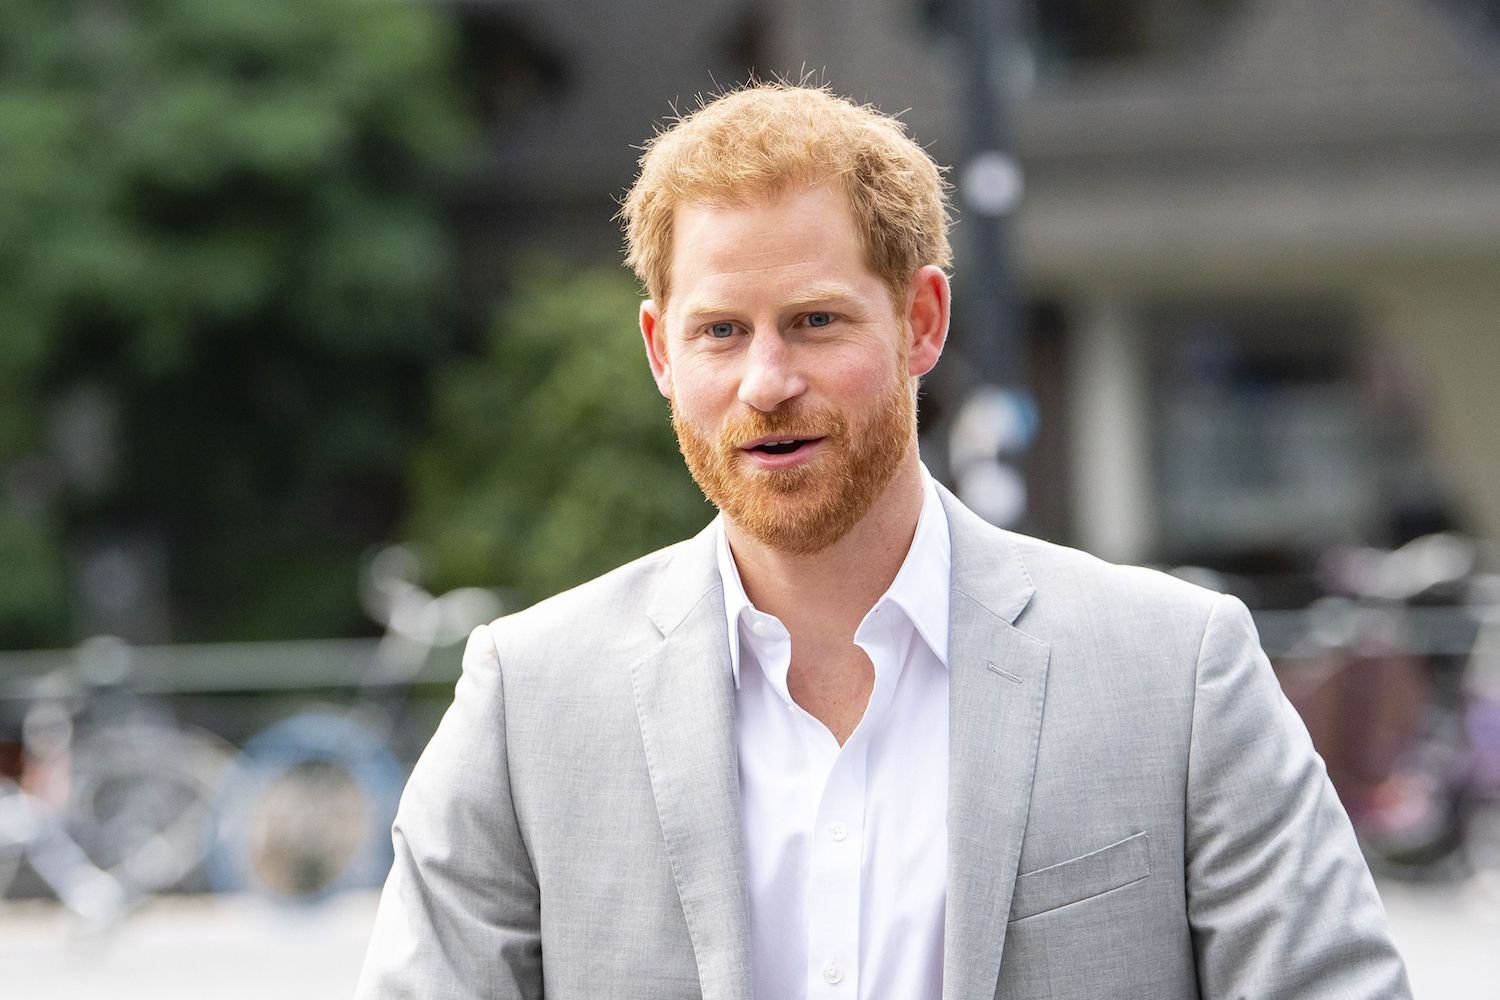 Prince Harry arrives at the ADAM Tower, in Amsterdam, on September 3, 2019 